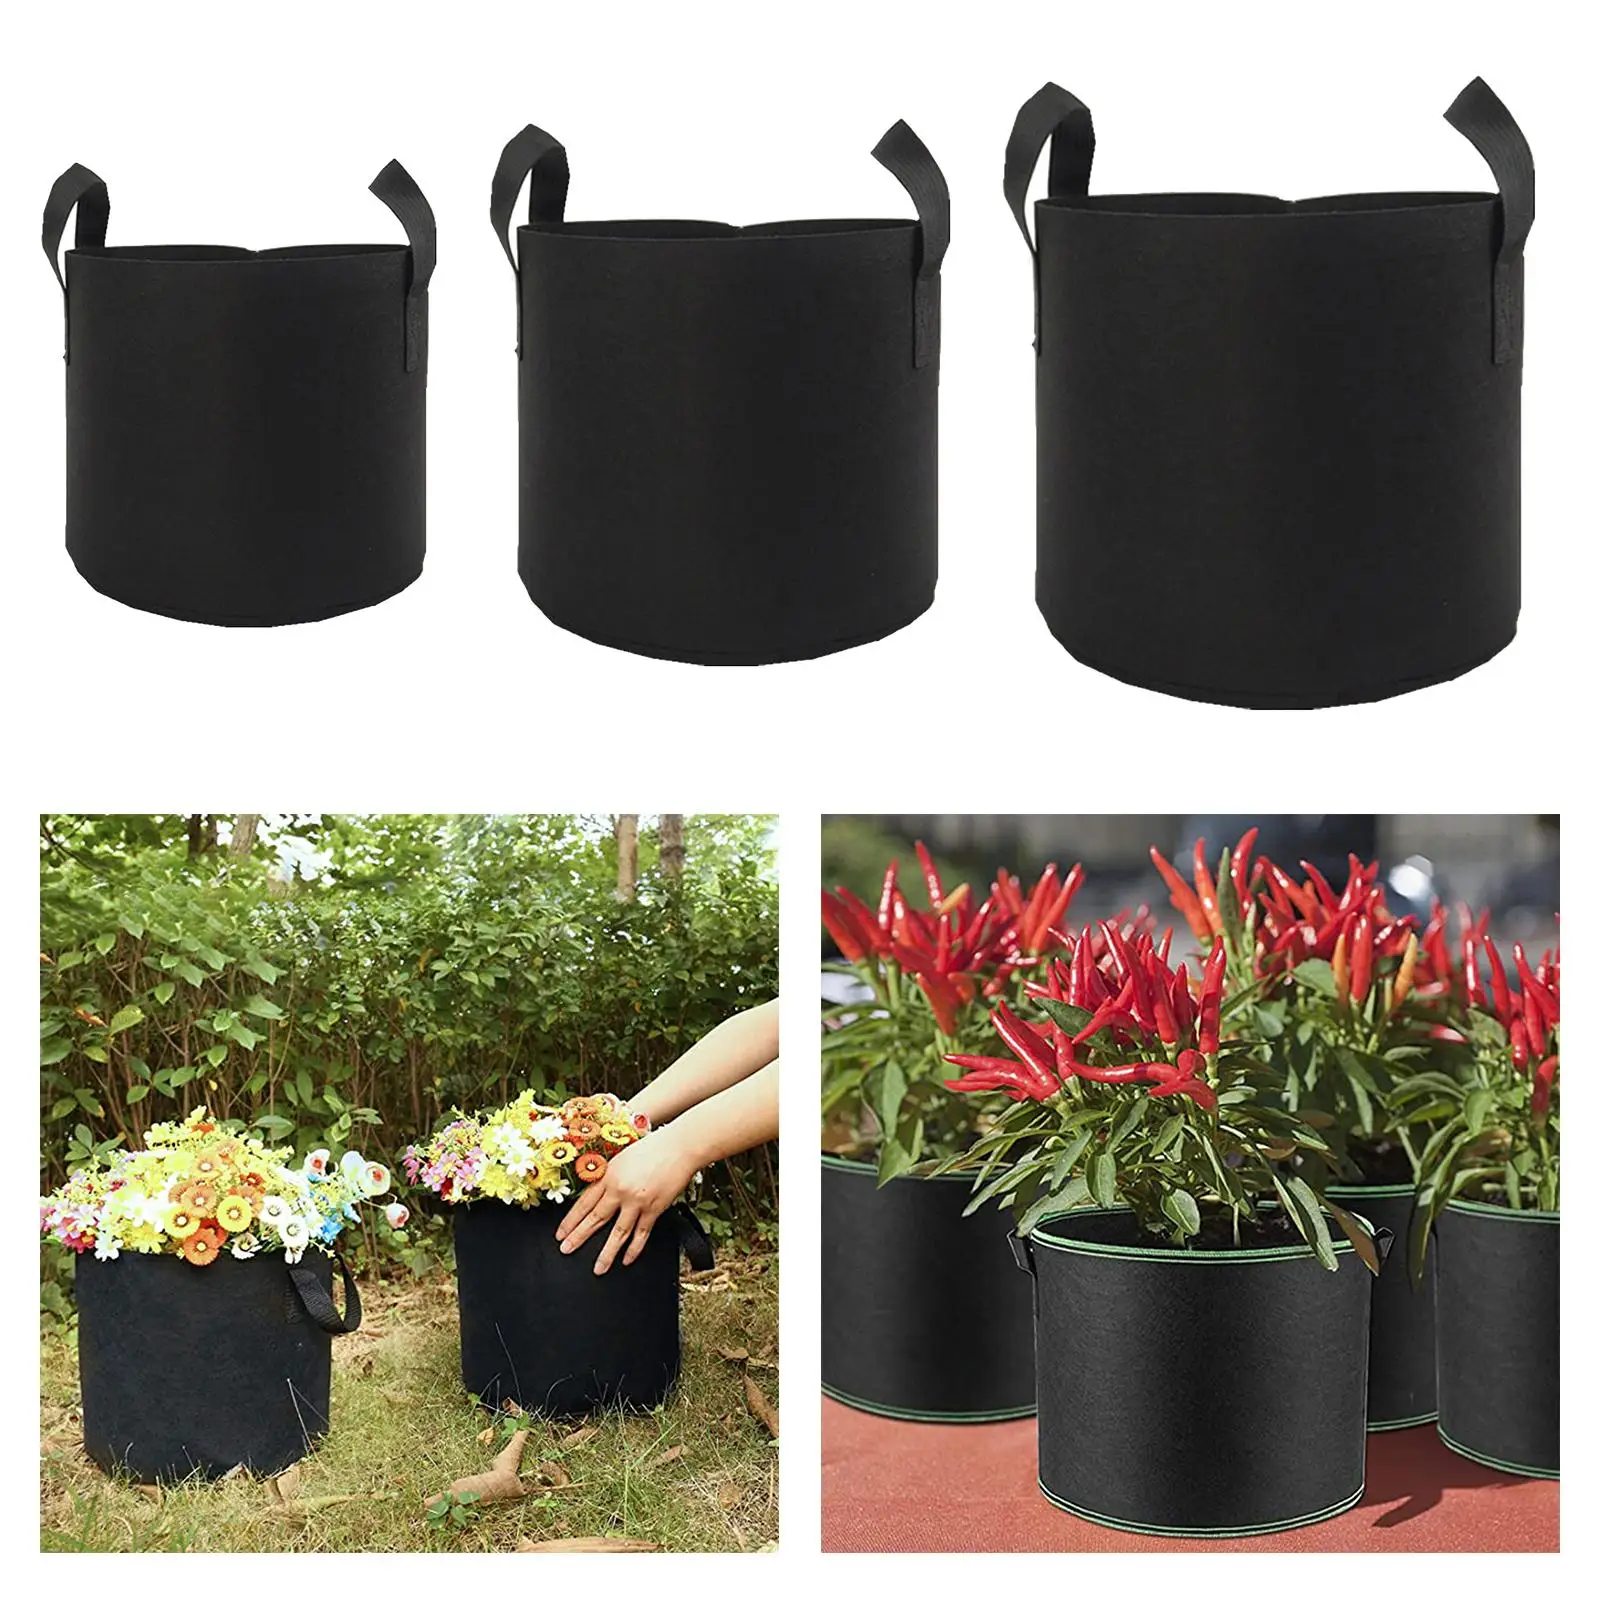 Large Bags w/Handles, Reinforced Non-Woven Planter Bags for Vegetables, Heavy Duty and durable Fabric Plant ing Bags